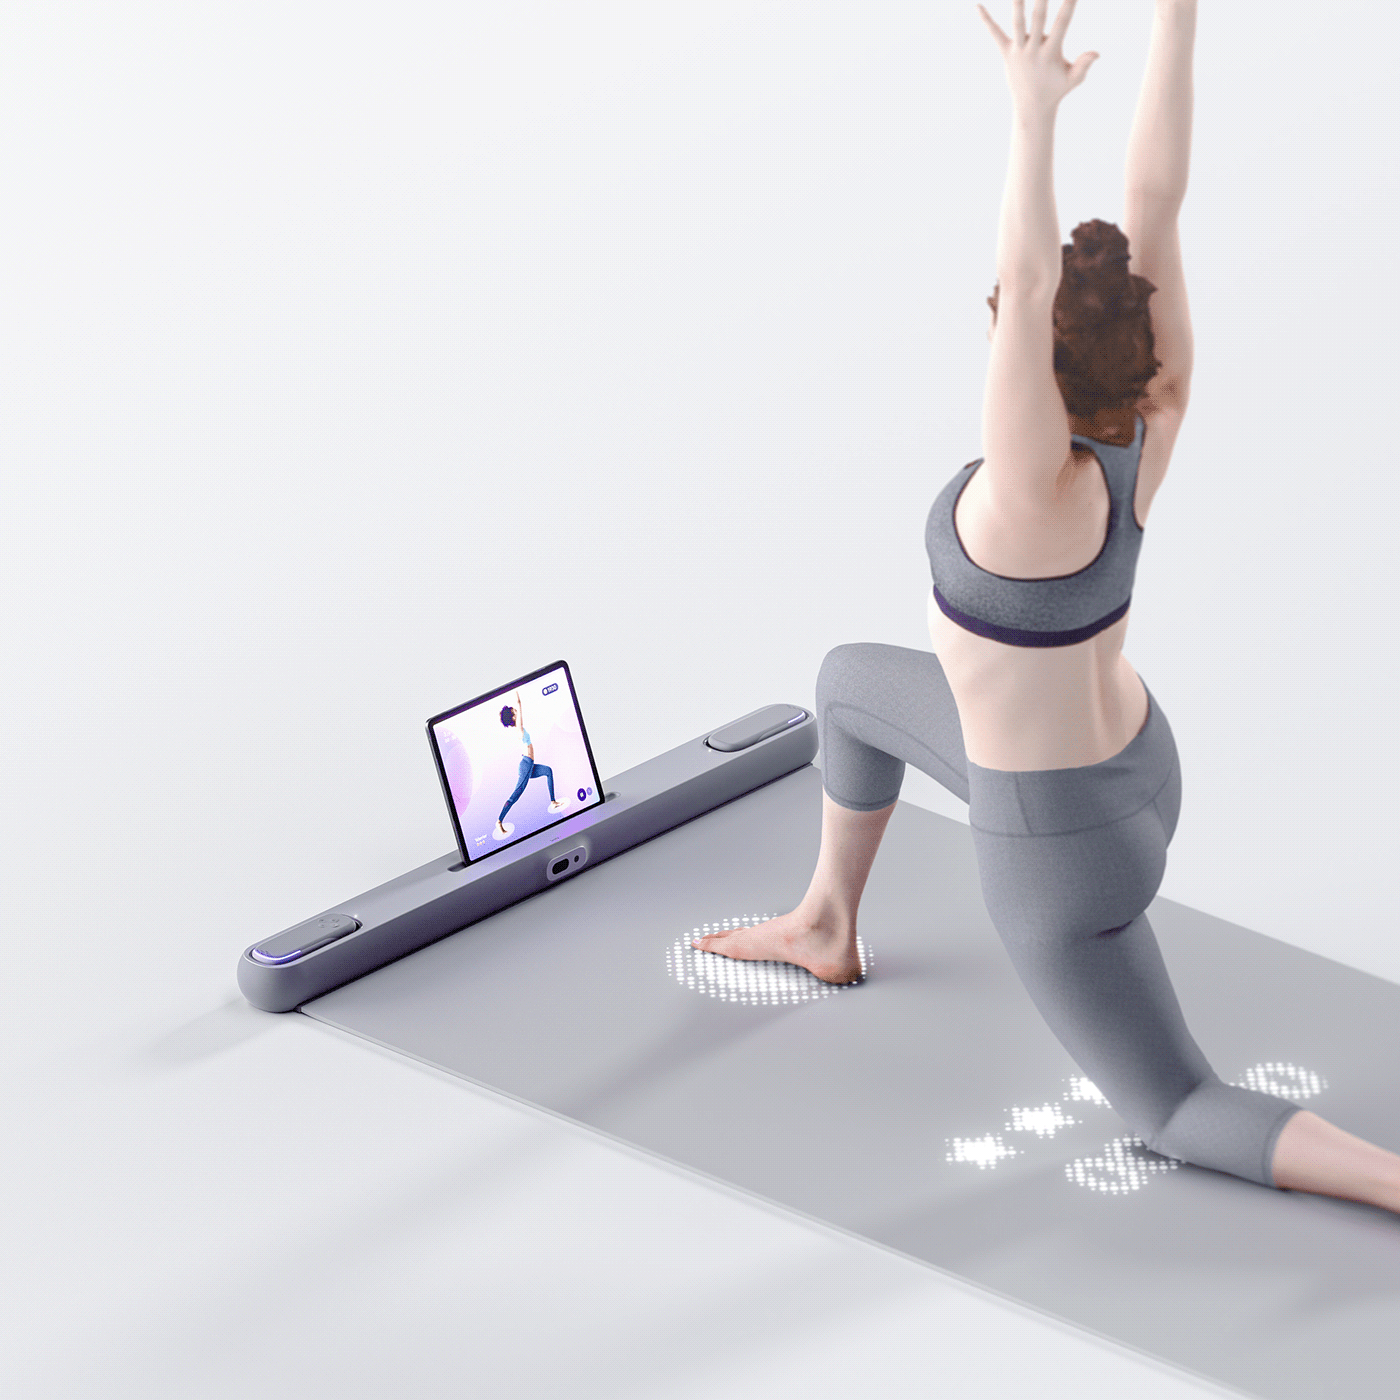 industrial industrial design  industrial designer product product design  Stretching Yoga design concept rendering fitness